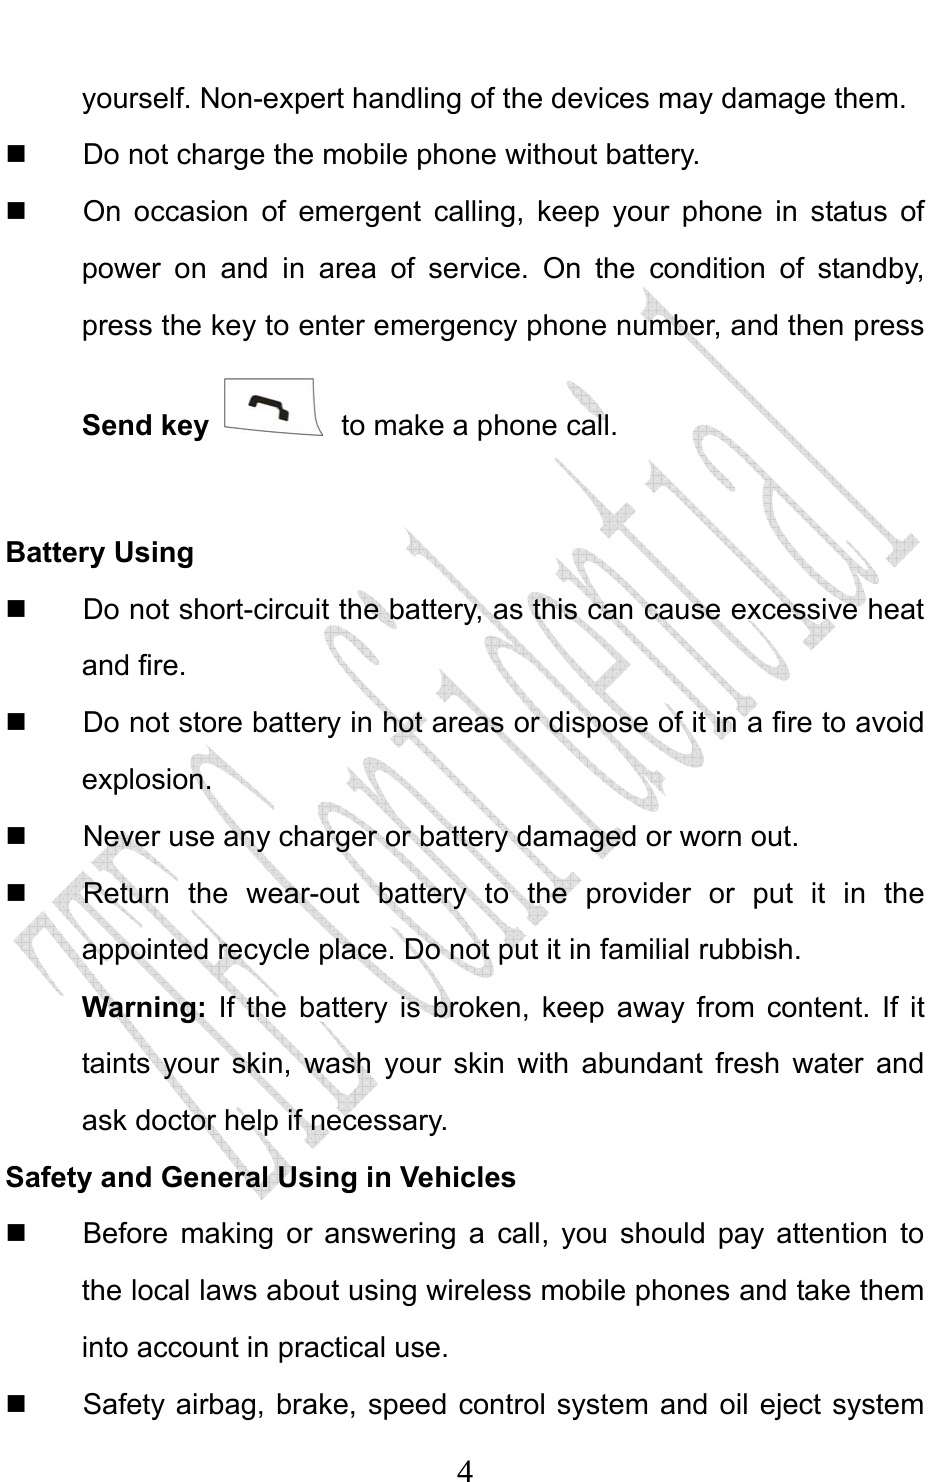                              4yourself. Non-expert handling of the devices may damage them.   Do not charge the mobile phone without battery.   On occasion of emergent calling, keep your phone in status of power on and in area of service. On the condition of standby, press the key to enter emergency phone number, and then press Send key  to make a phone call.  Battery Using   Do not short-circuit the battery, as this can cause excessive heat and fire.   Do not store battery in hot areas or dispose of it in a fire to avoid explosion.   Never use any charger or battery damaged or worn out.   Return the wear-out battery to the provider or put it in the appointed recycle place. Do not put it in familial rubbish. Warning: If the battery is broken, keep away from content. If it taints your skin, wash your skin with abundant fresh water and ask doctor help if necessary. Safety and General Using in Vehicles   Before making or answering a call, you should pay attention to the local laws about using wireless mobile phones and take them into account in practical use.   Safety airbag, brake, speed control system and oil eject system 